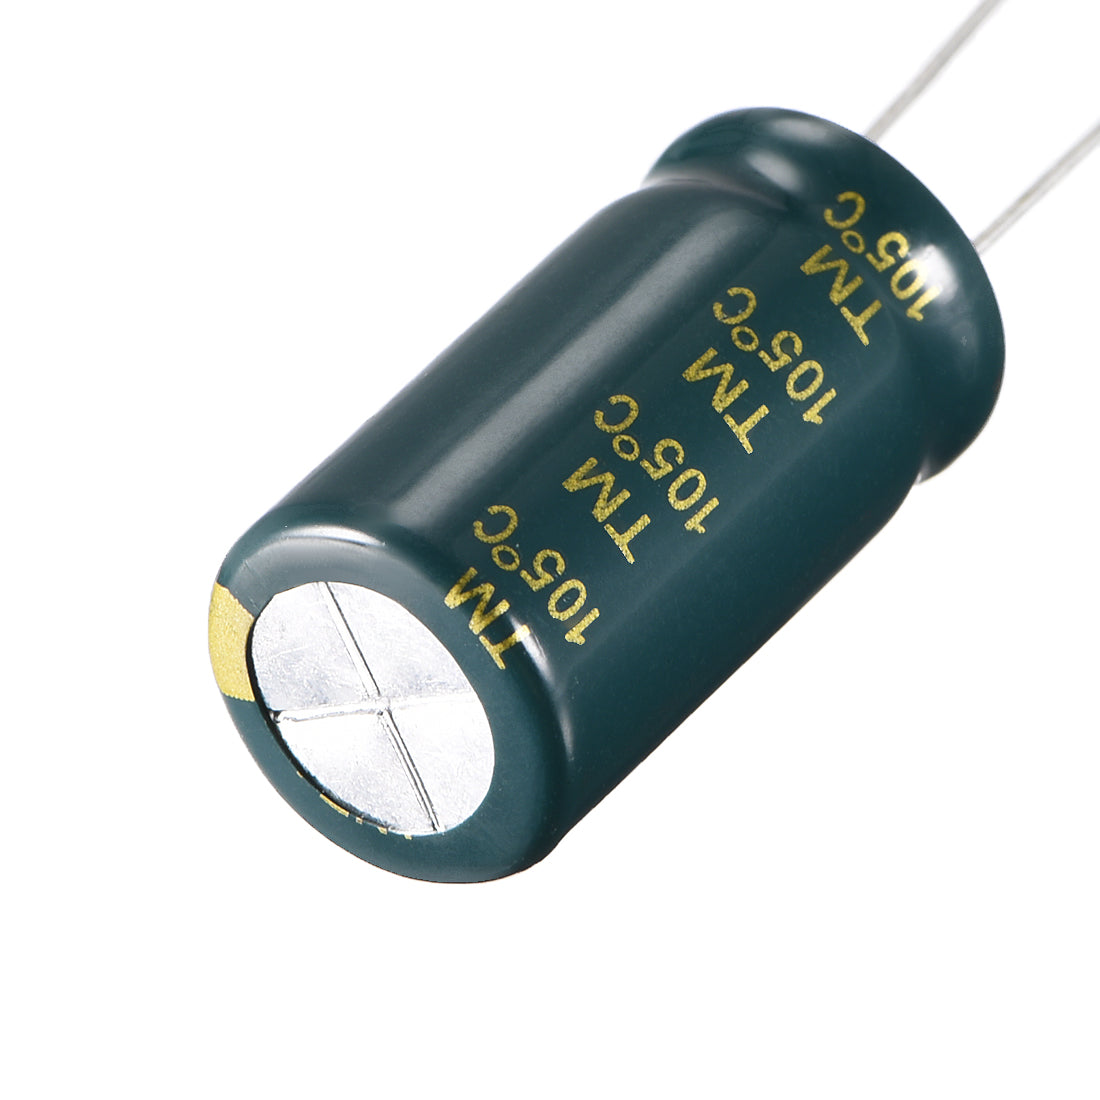 uxcell Uxcell Aluminum Radial Electrolytic Capacitor Low ESR Green with 1000UF 50V 105 Celsius Life 3000H 13 x 25 mm High Ripple Current,Low Impedance 5pcs